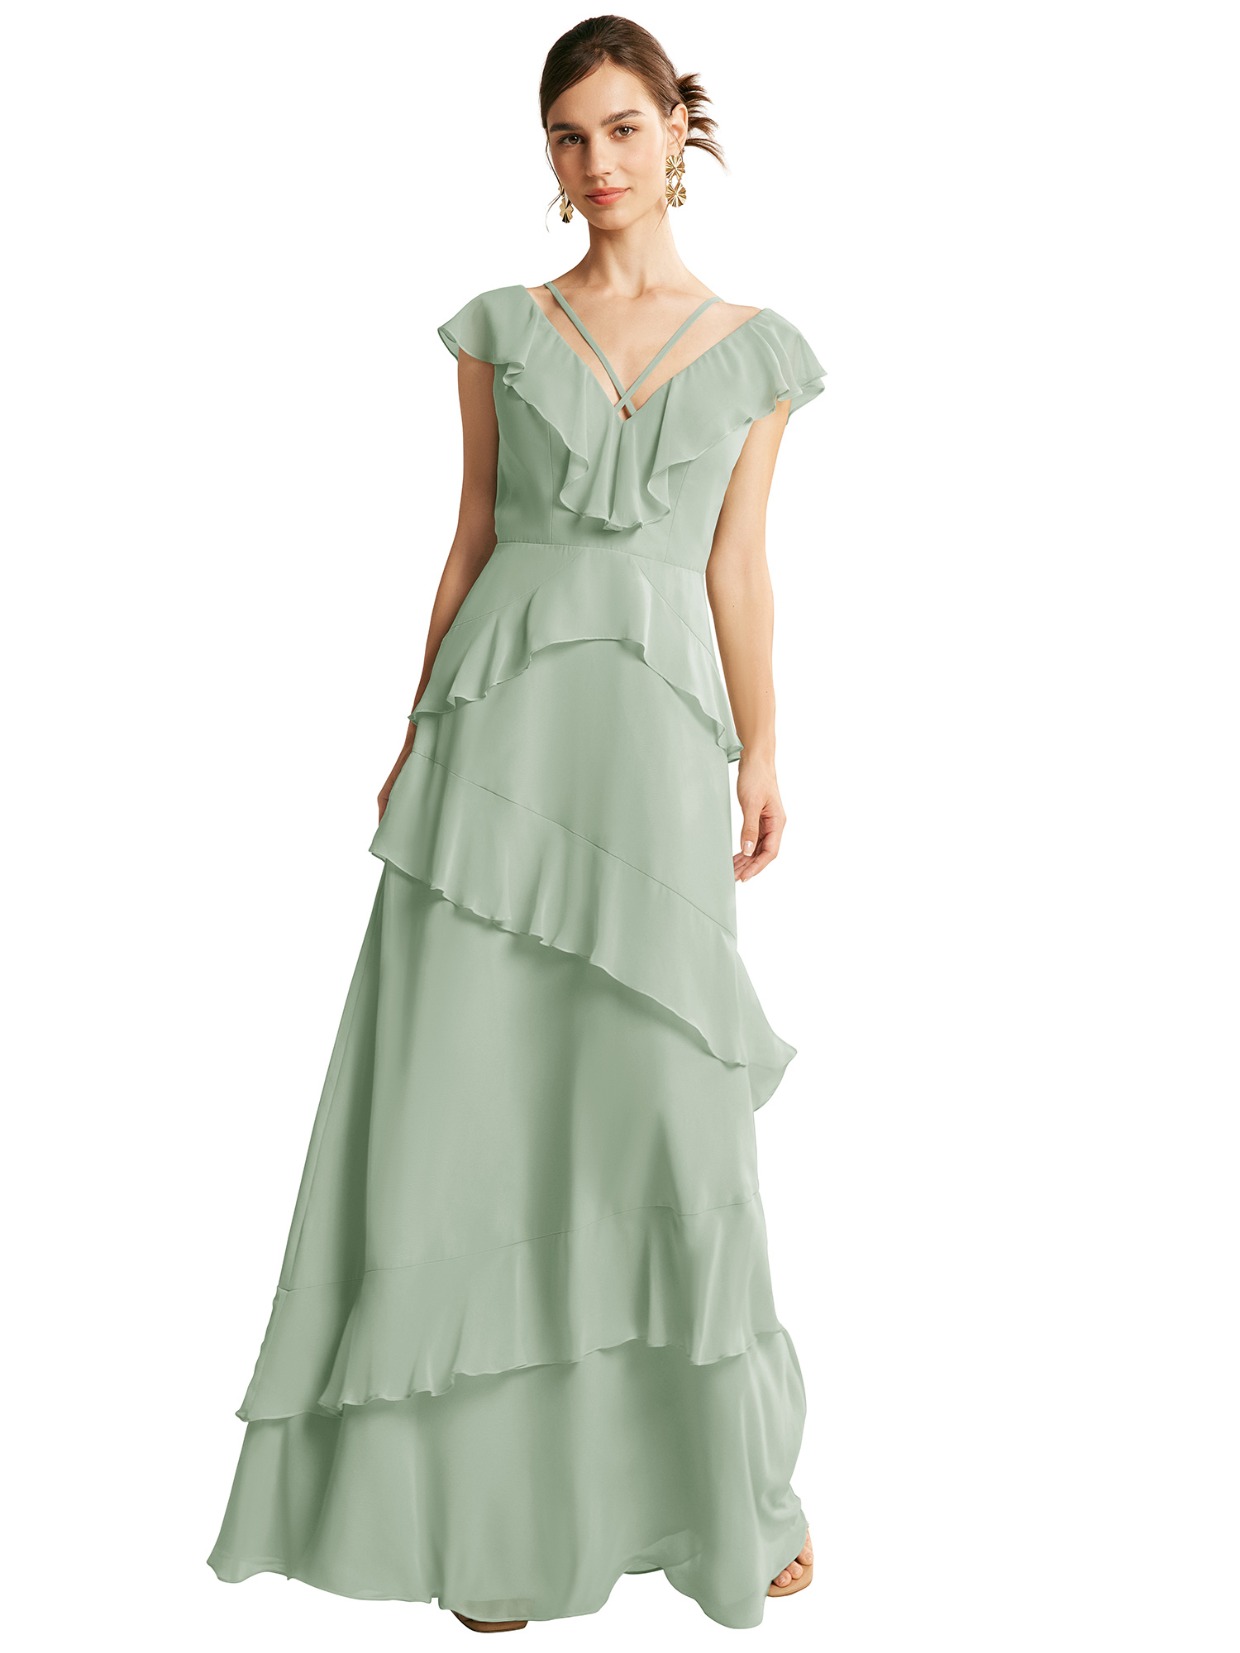 strappy ruffled bridesmaid dress in sage green from AW Bridal